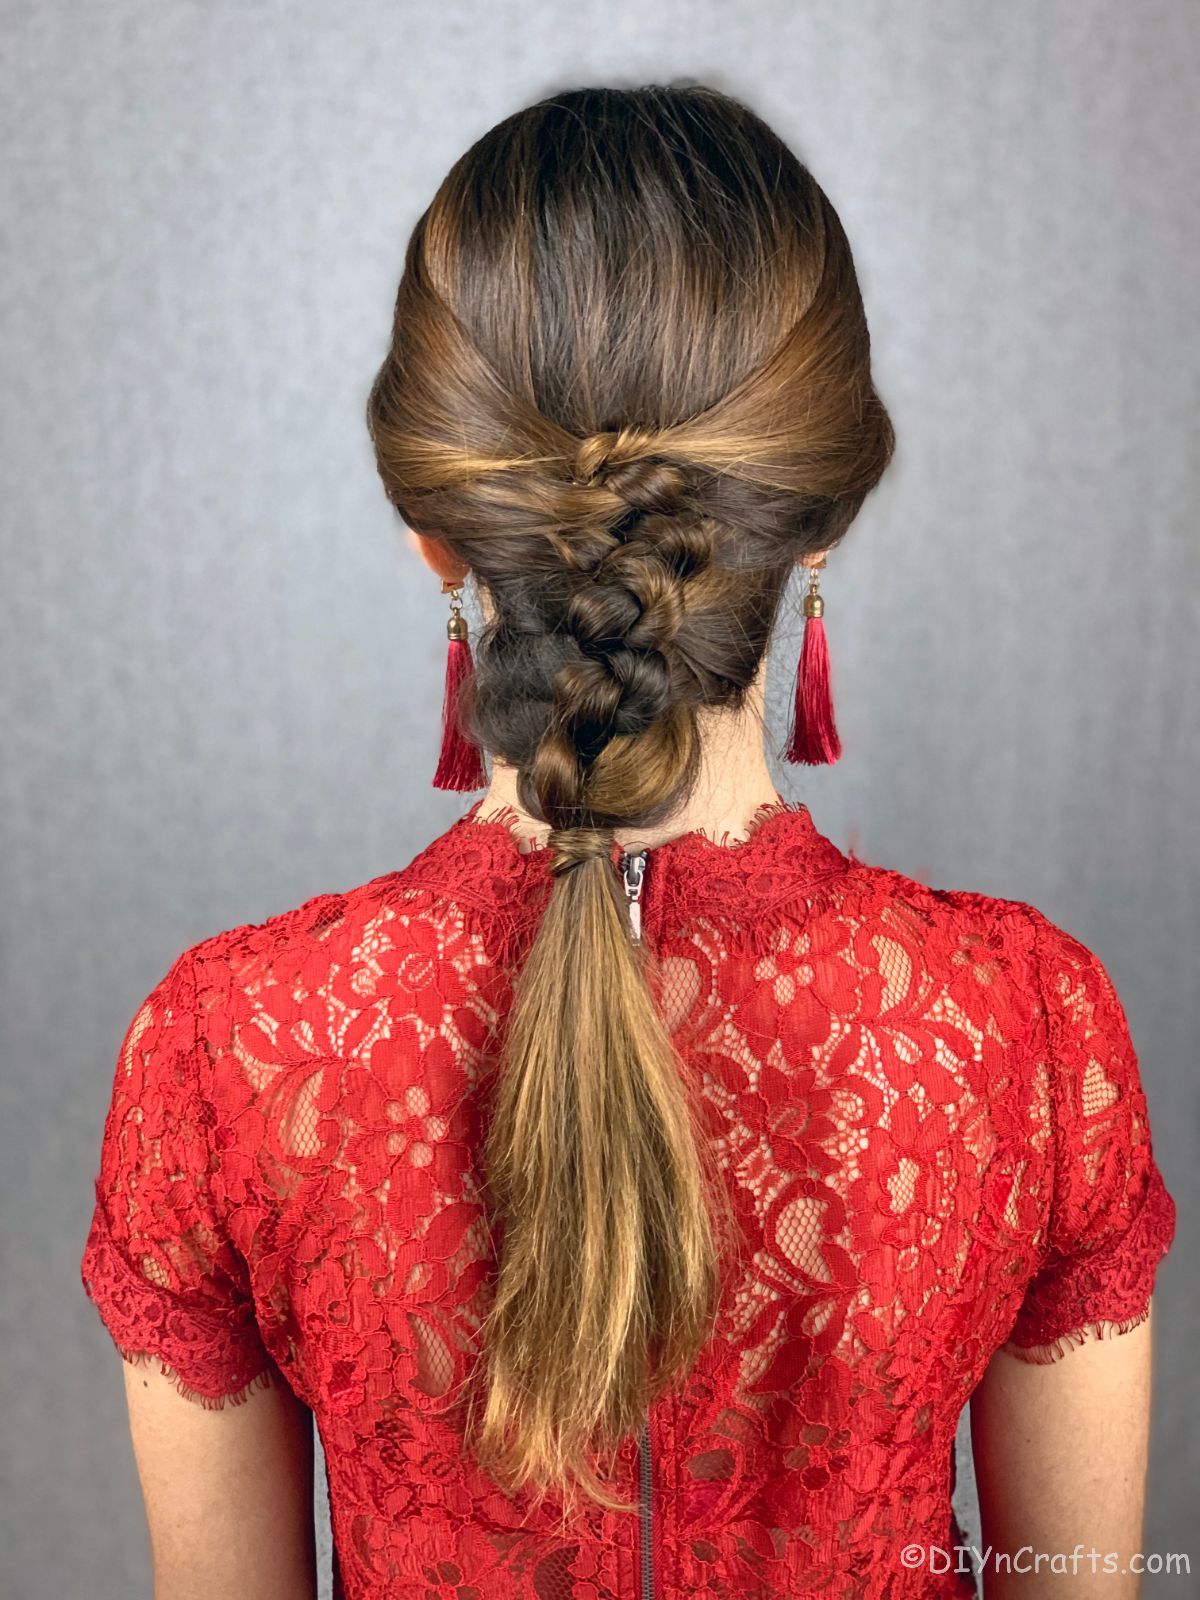 woman in red shirt with knot braided hair